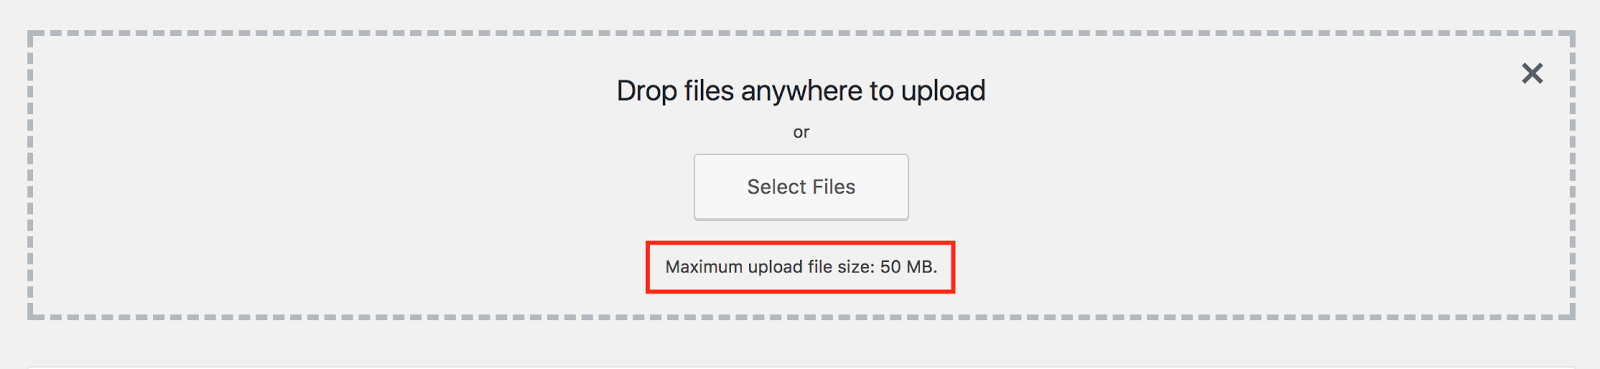 drop files anywhere to upload in WordPress 